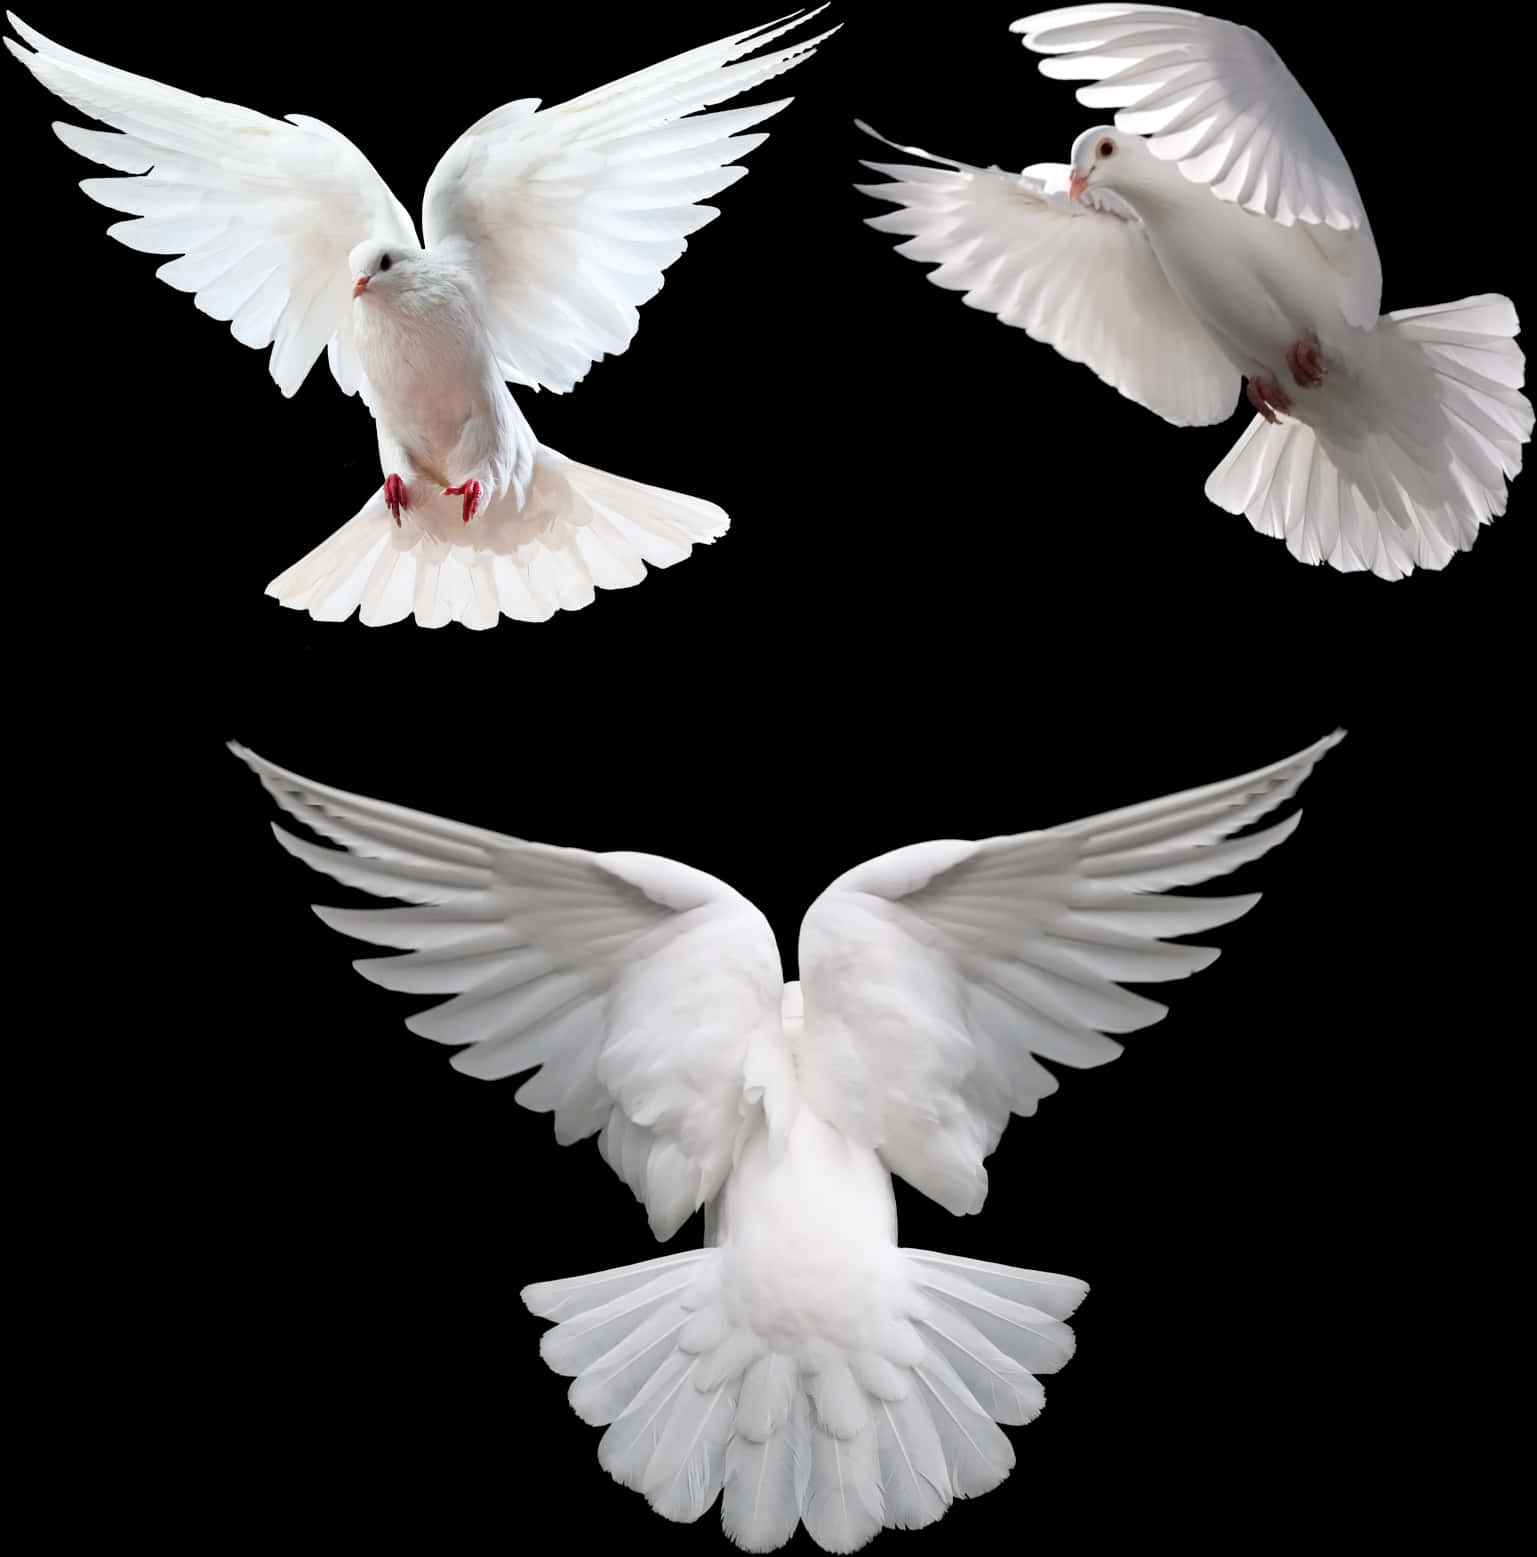 Three White Doves In Flight PNG image